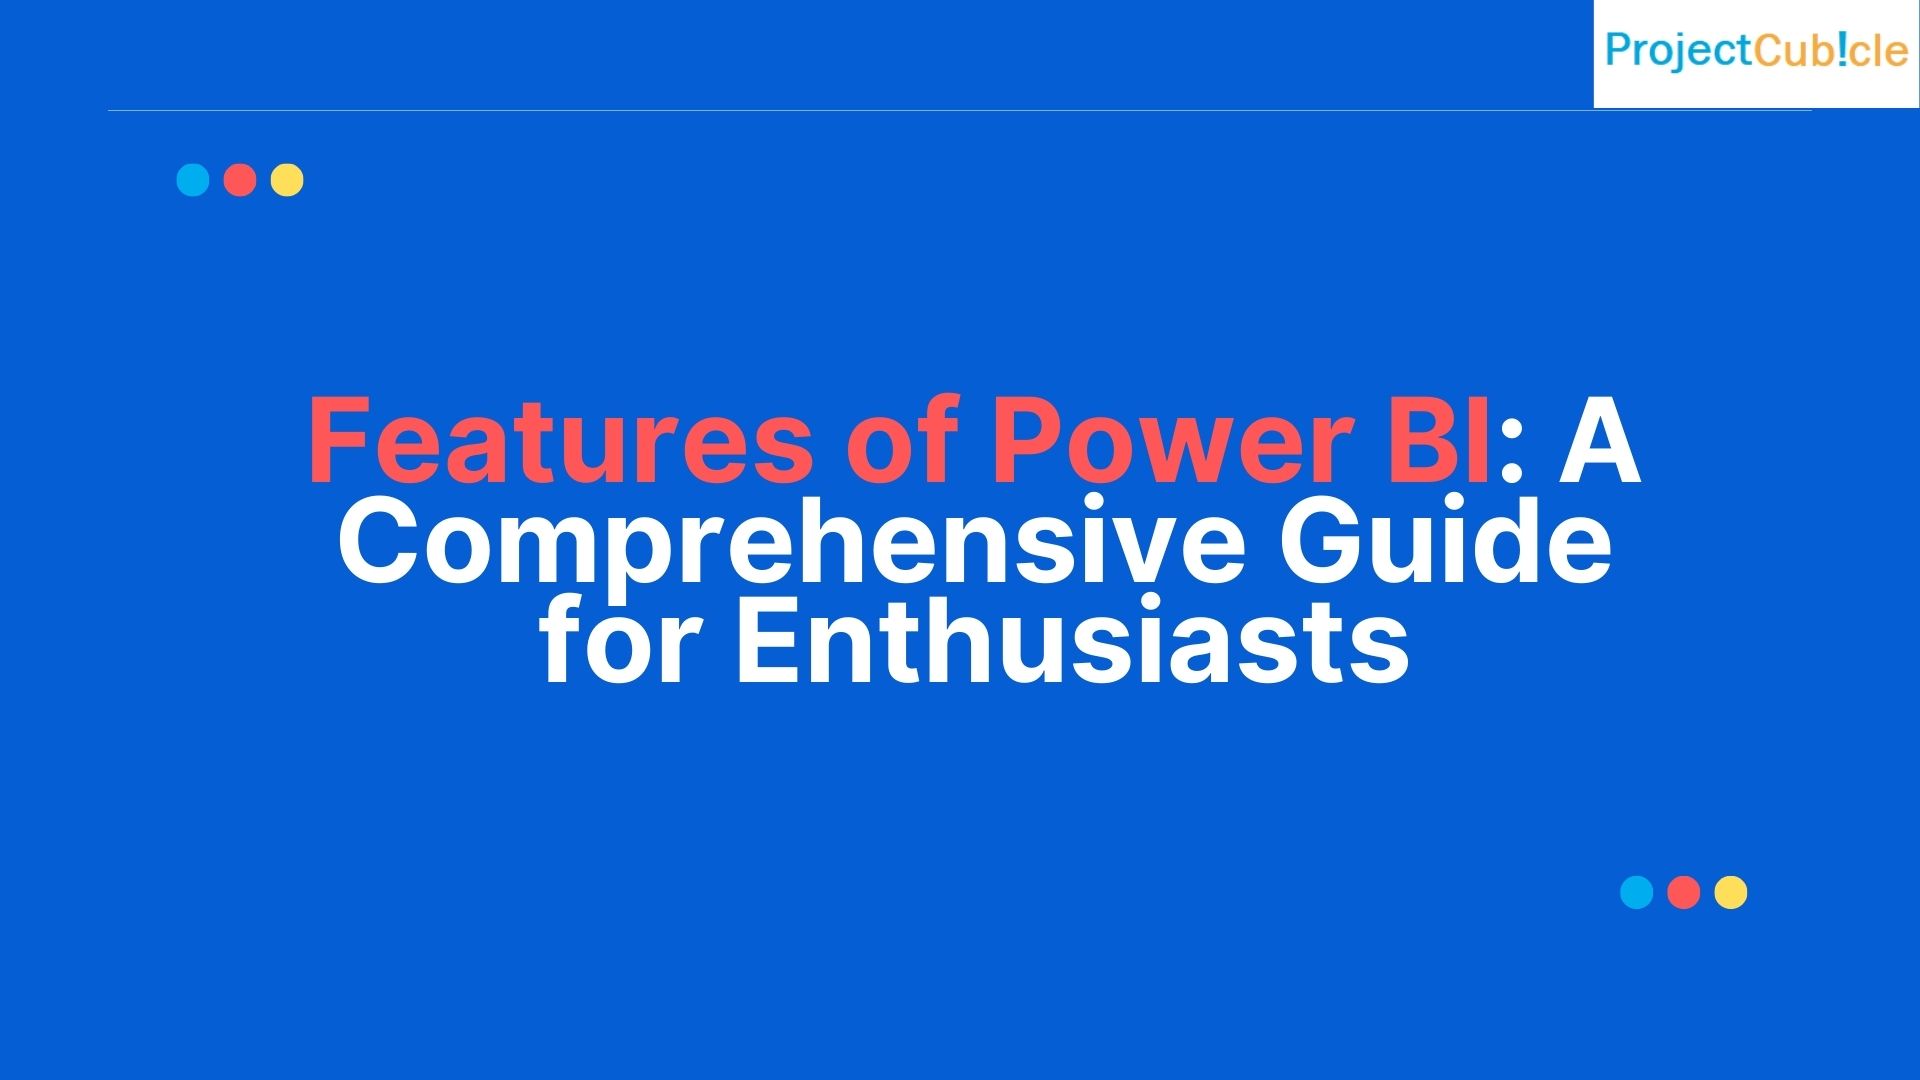 Features of Power BI: A Comprehensive Guide for Enthusiasts